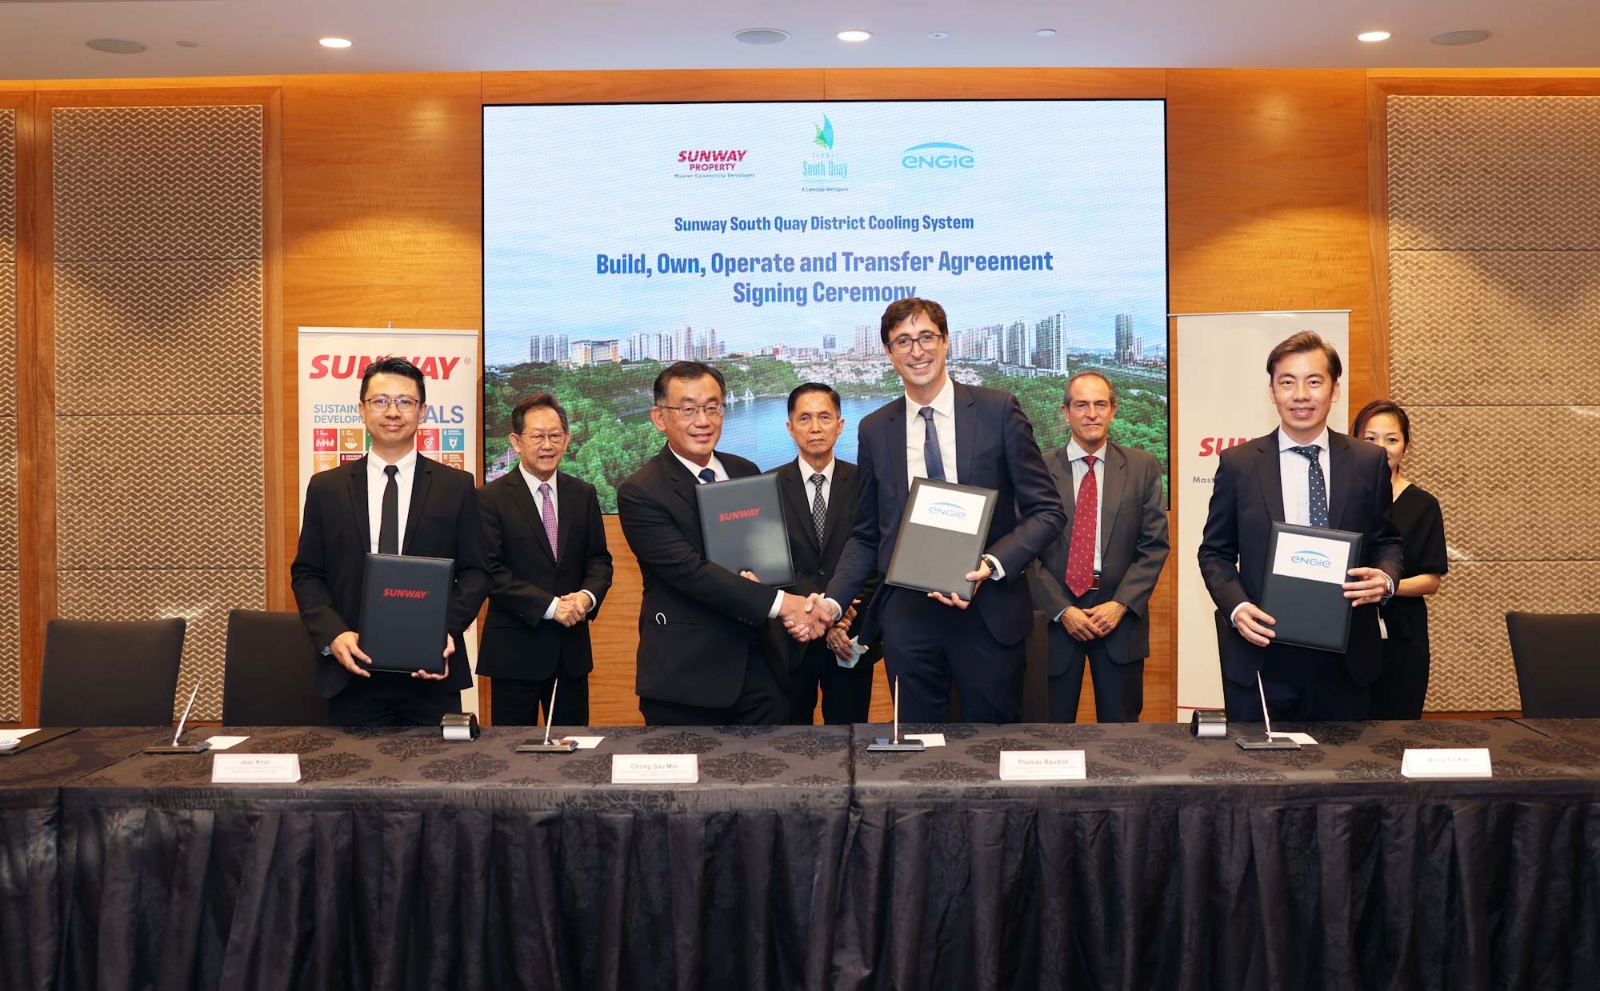 Thomas Baudlot, ENGIE CEO Energy Solutions APAC and Country Head for Southeast Asia and Sunway Property Central Region Senior Executive Director Chong Sau Min shake hands at signing ceremony in Malaysia 